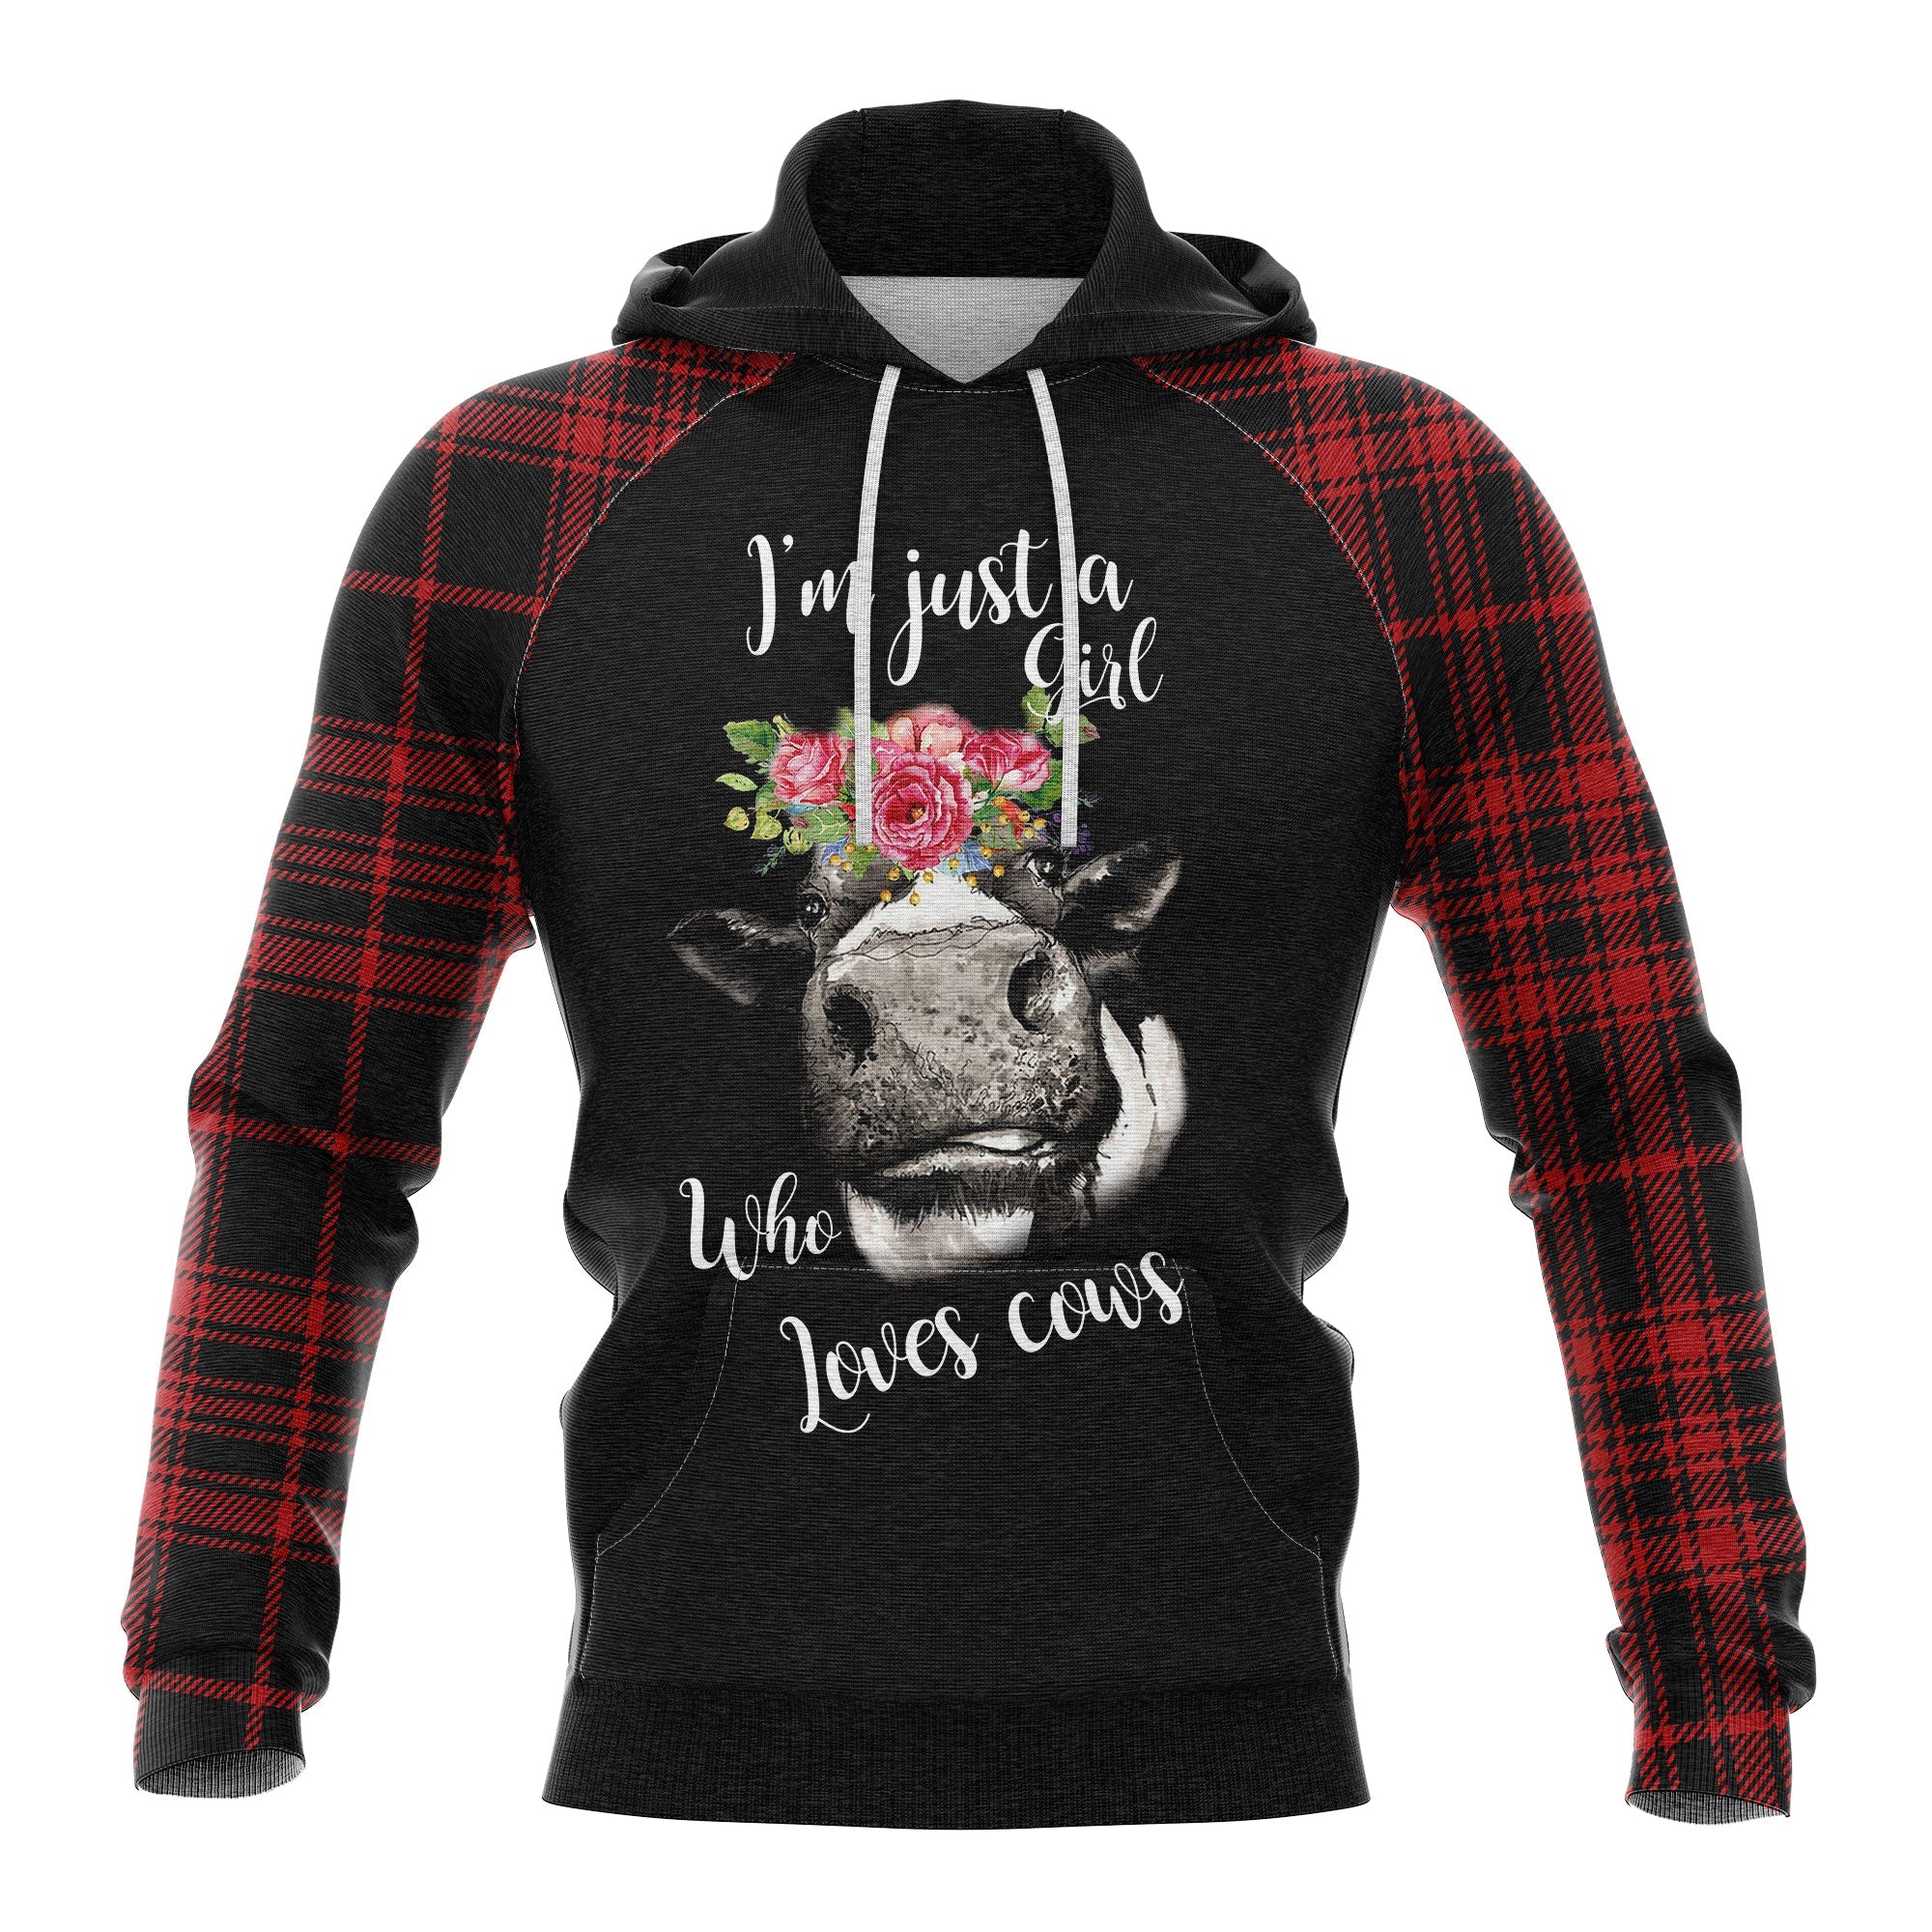 I'm Just A Girl Who Loves Cows Hoodie For Men And Women